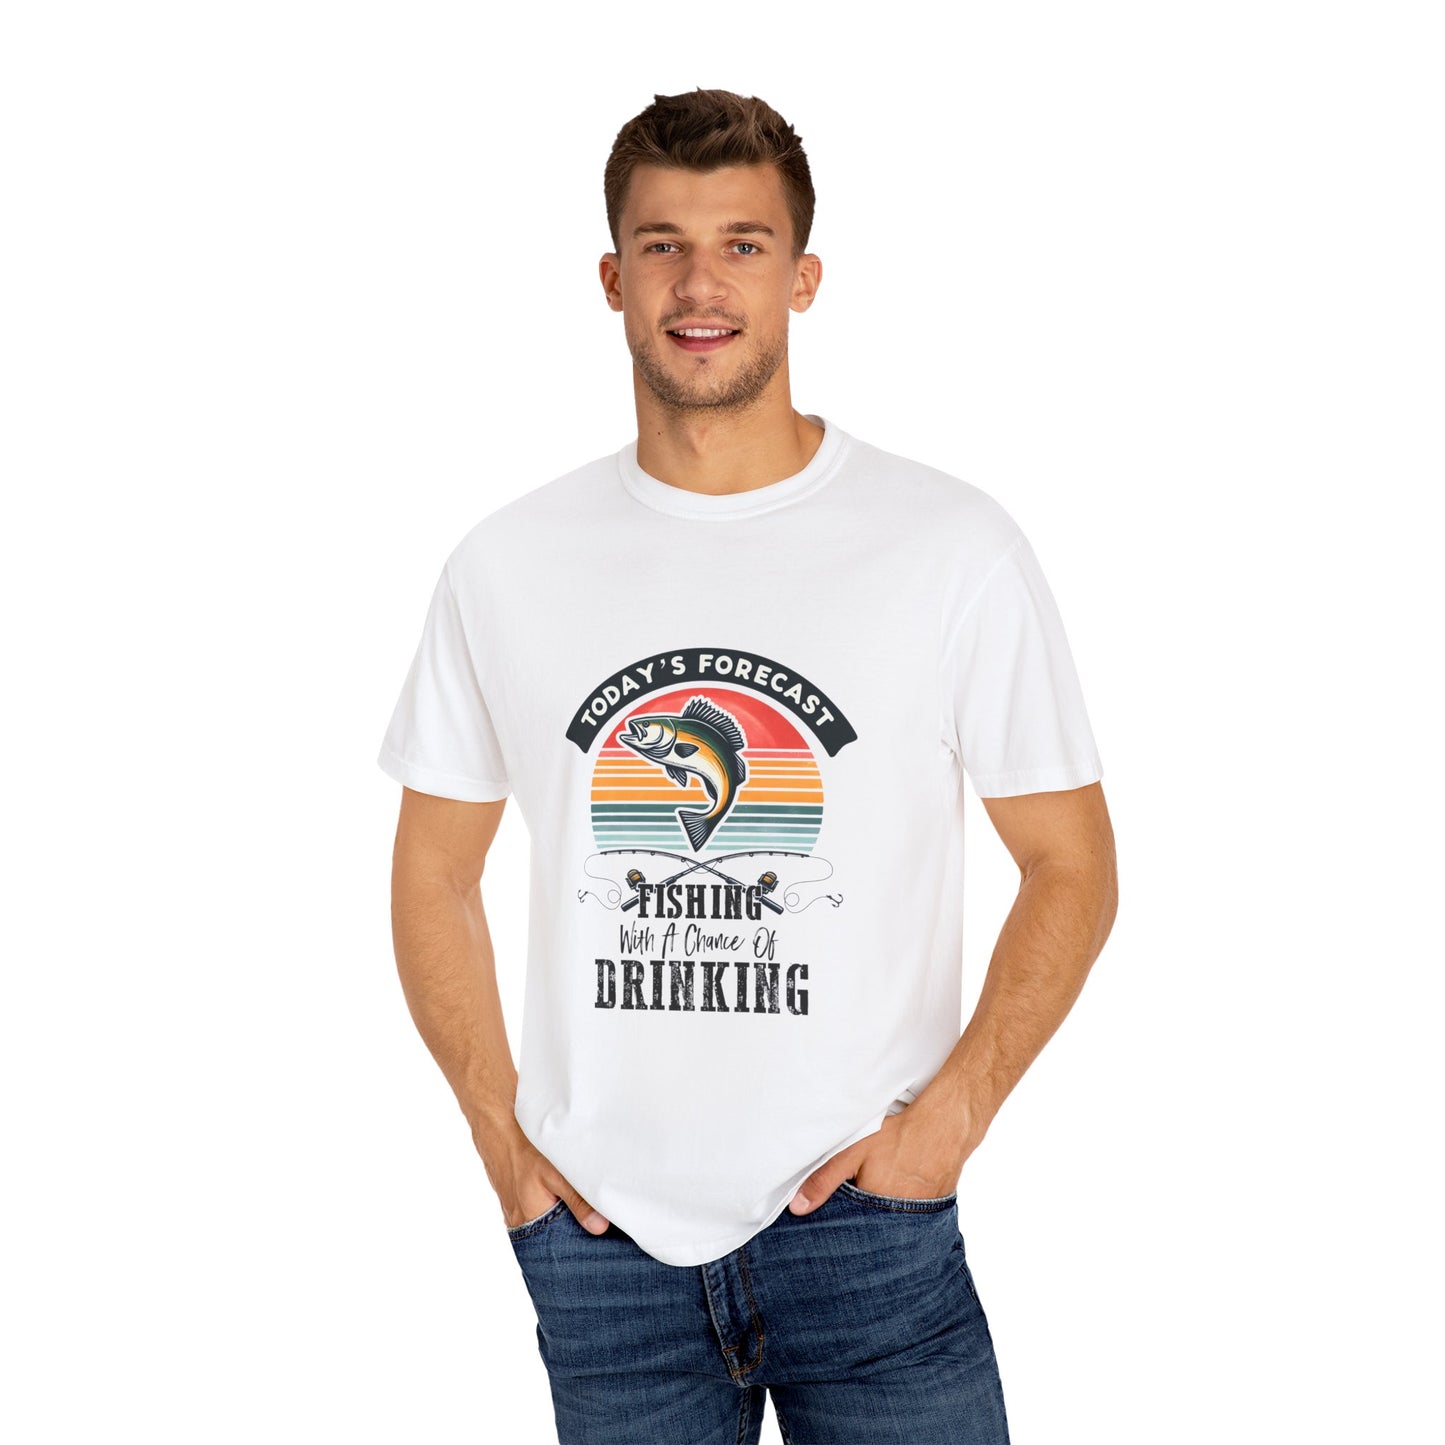 Fishing and drinking Unisex Garment-Dyed T-shirt